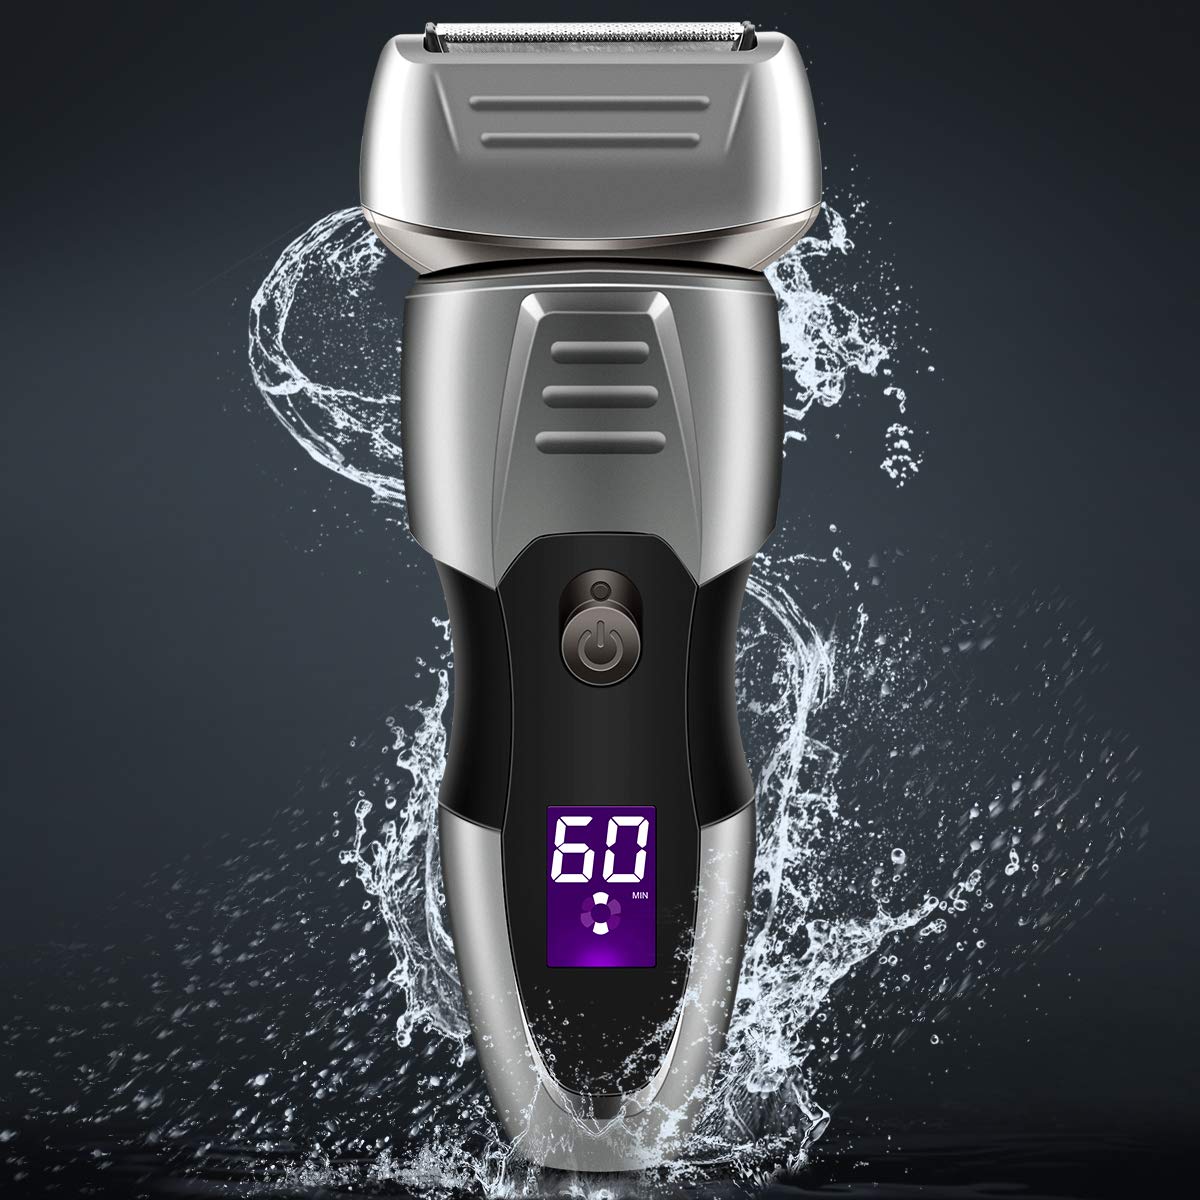 10 Best Electric Shavers for Men 2020